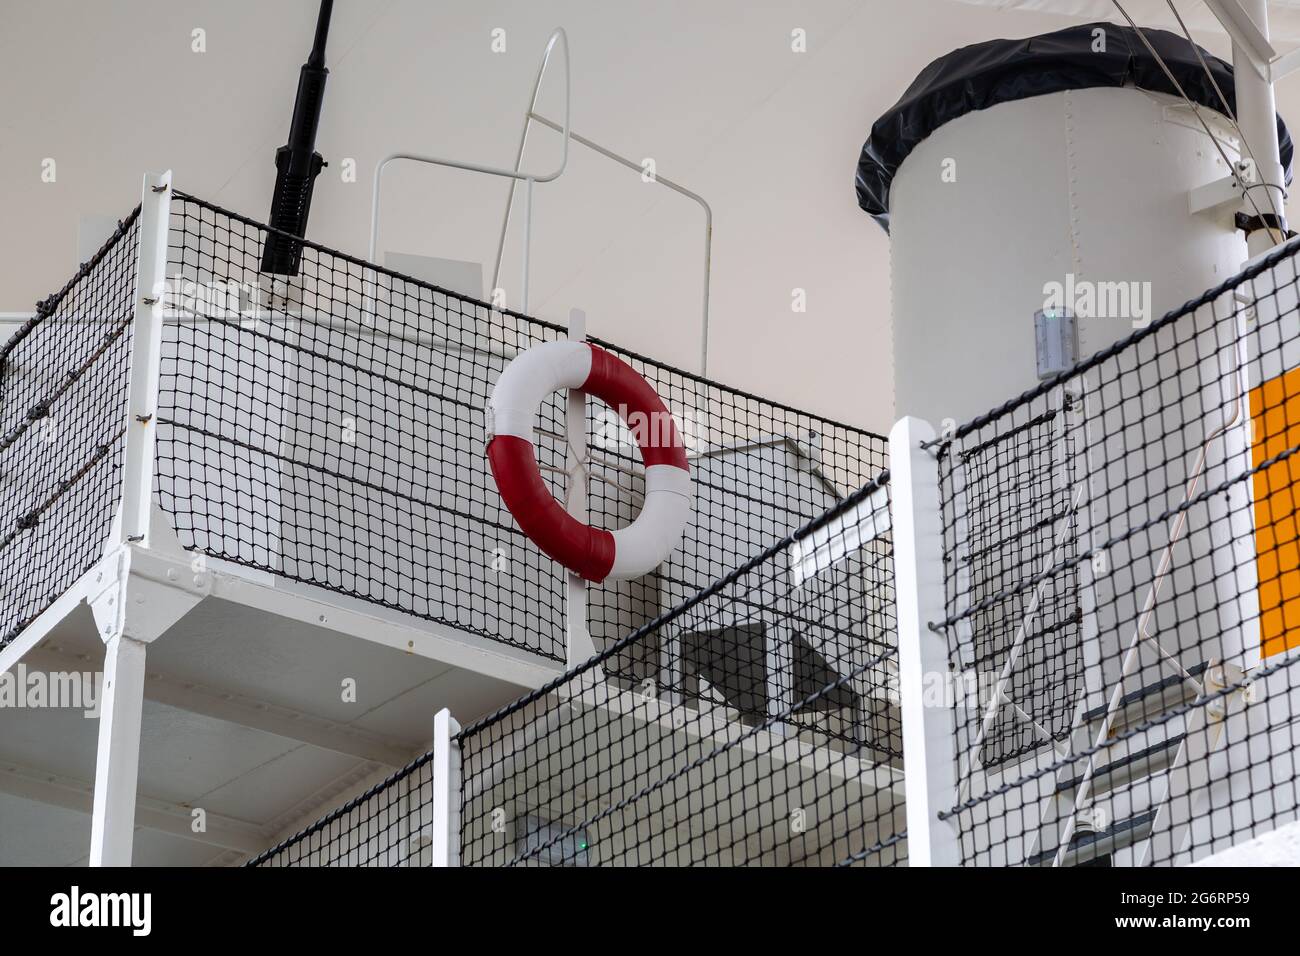 A red and white life ring on the upper deck of an old ship Stock Photo